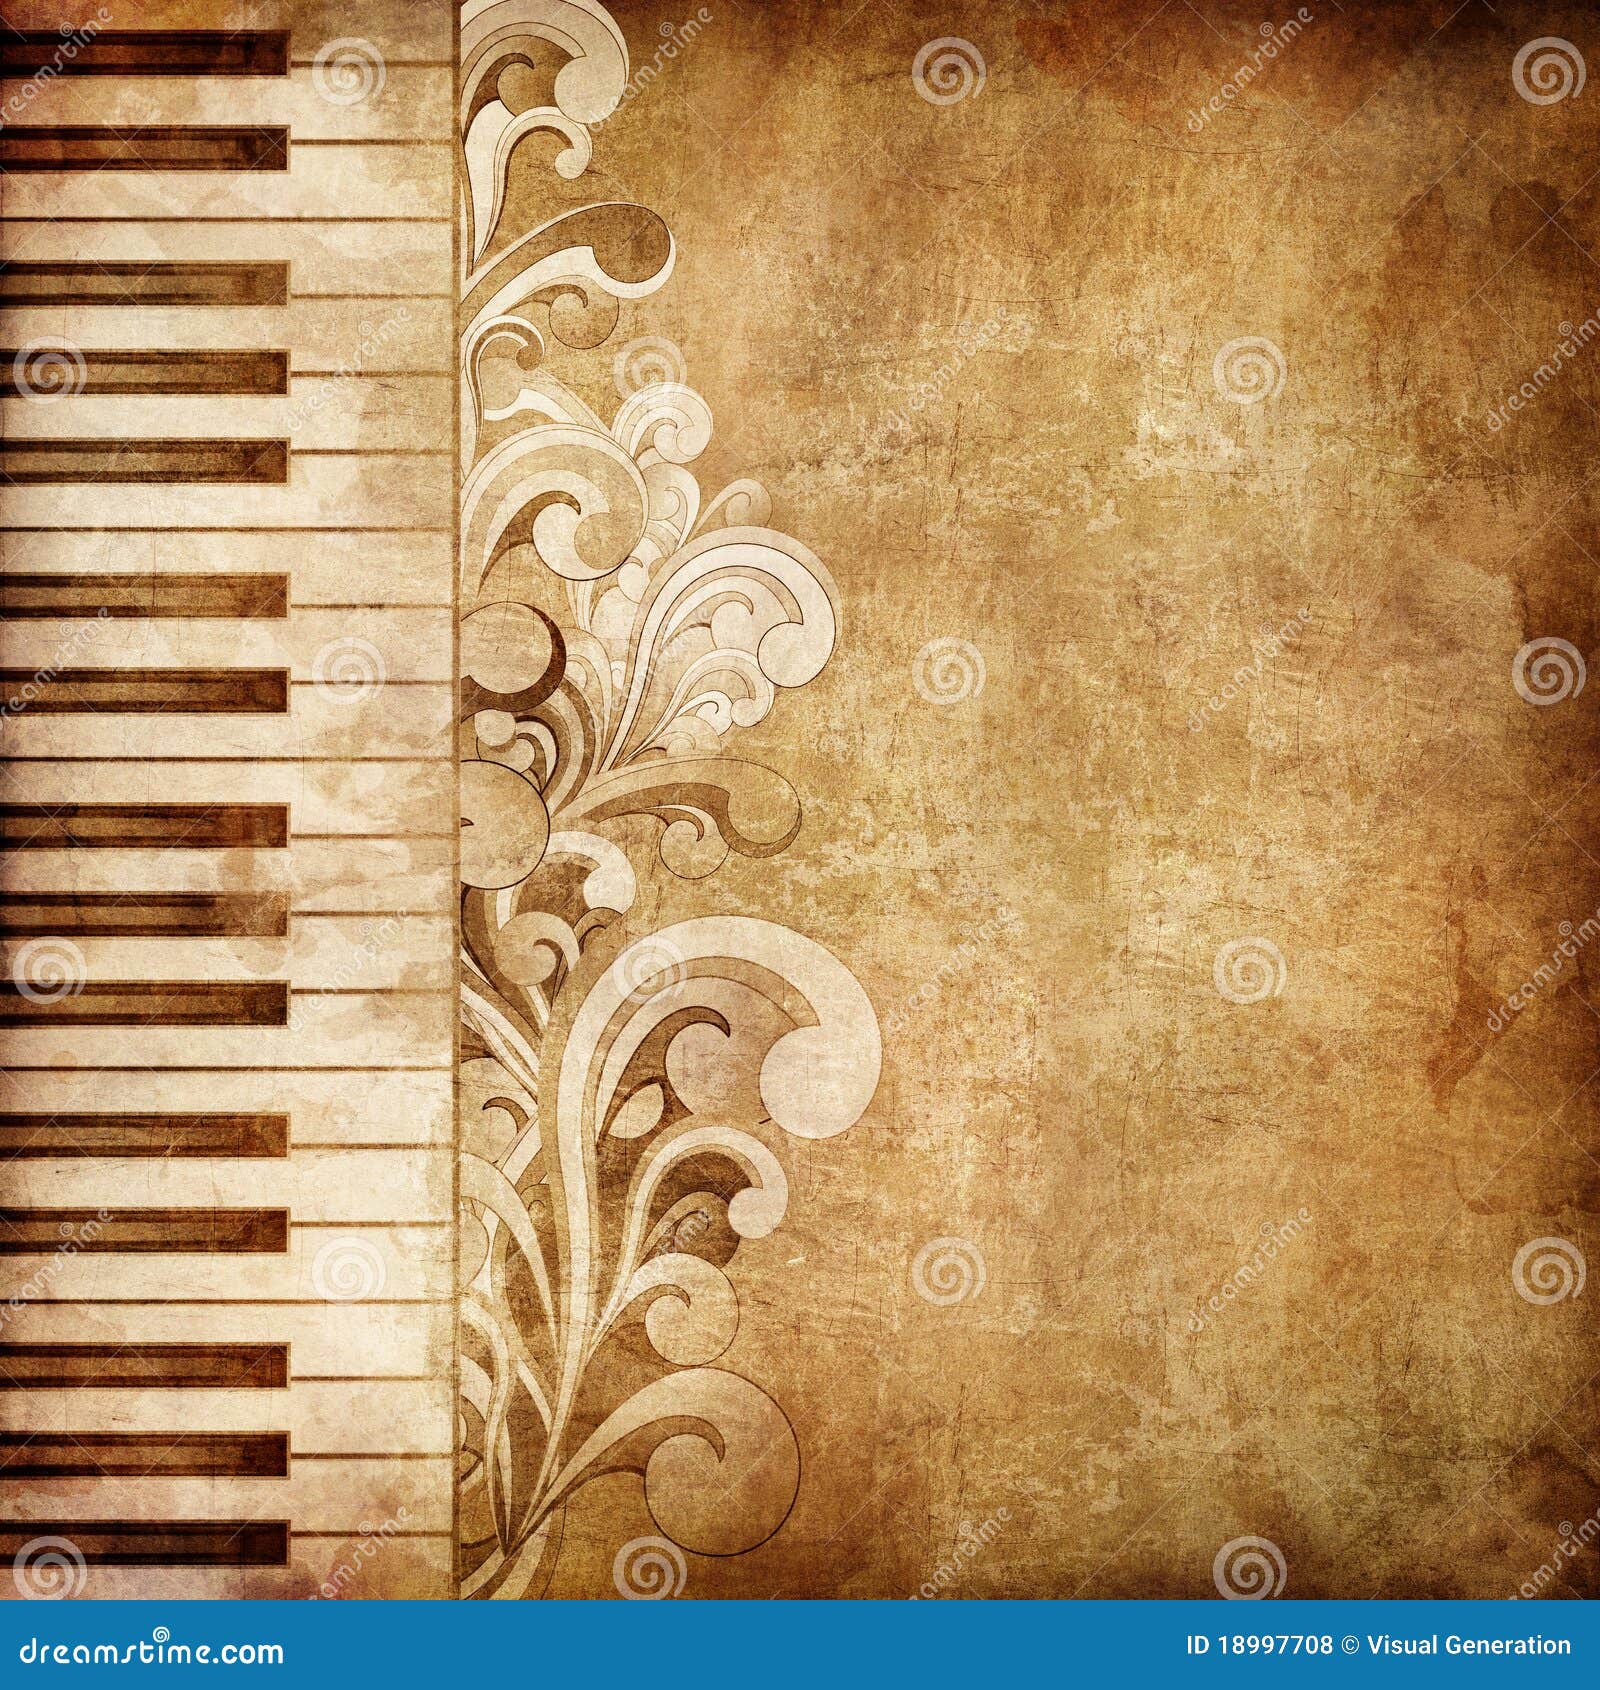 Music sheet on old paper seamless pattern Vector Image